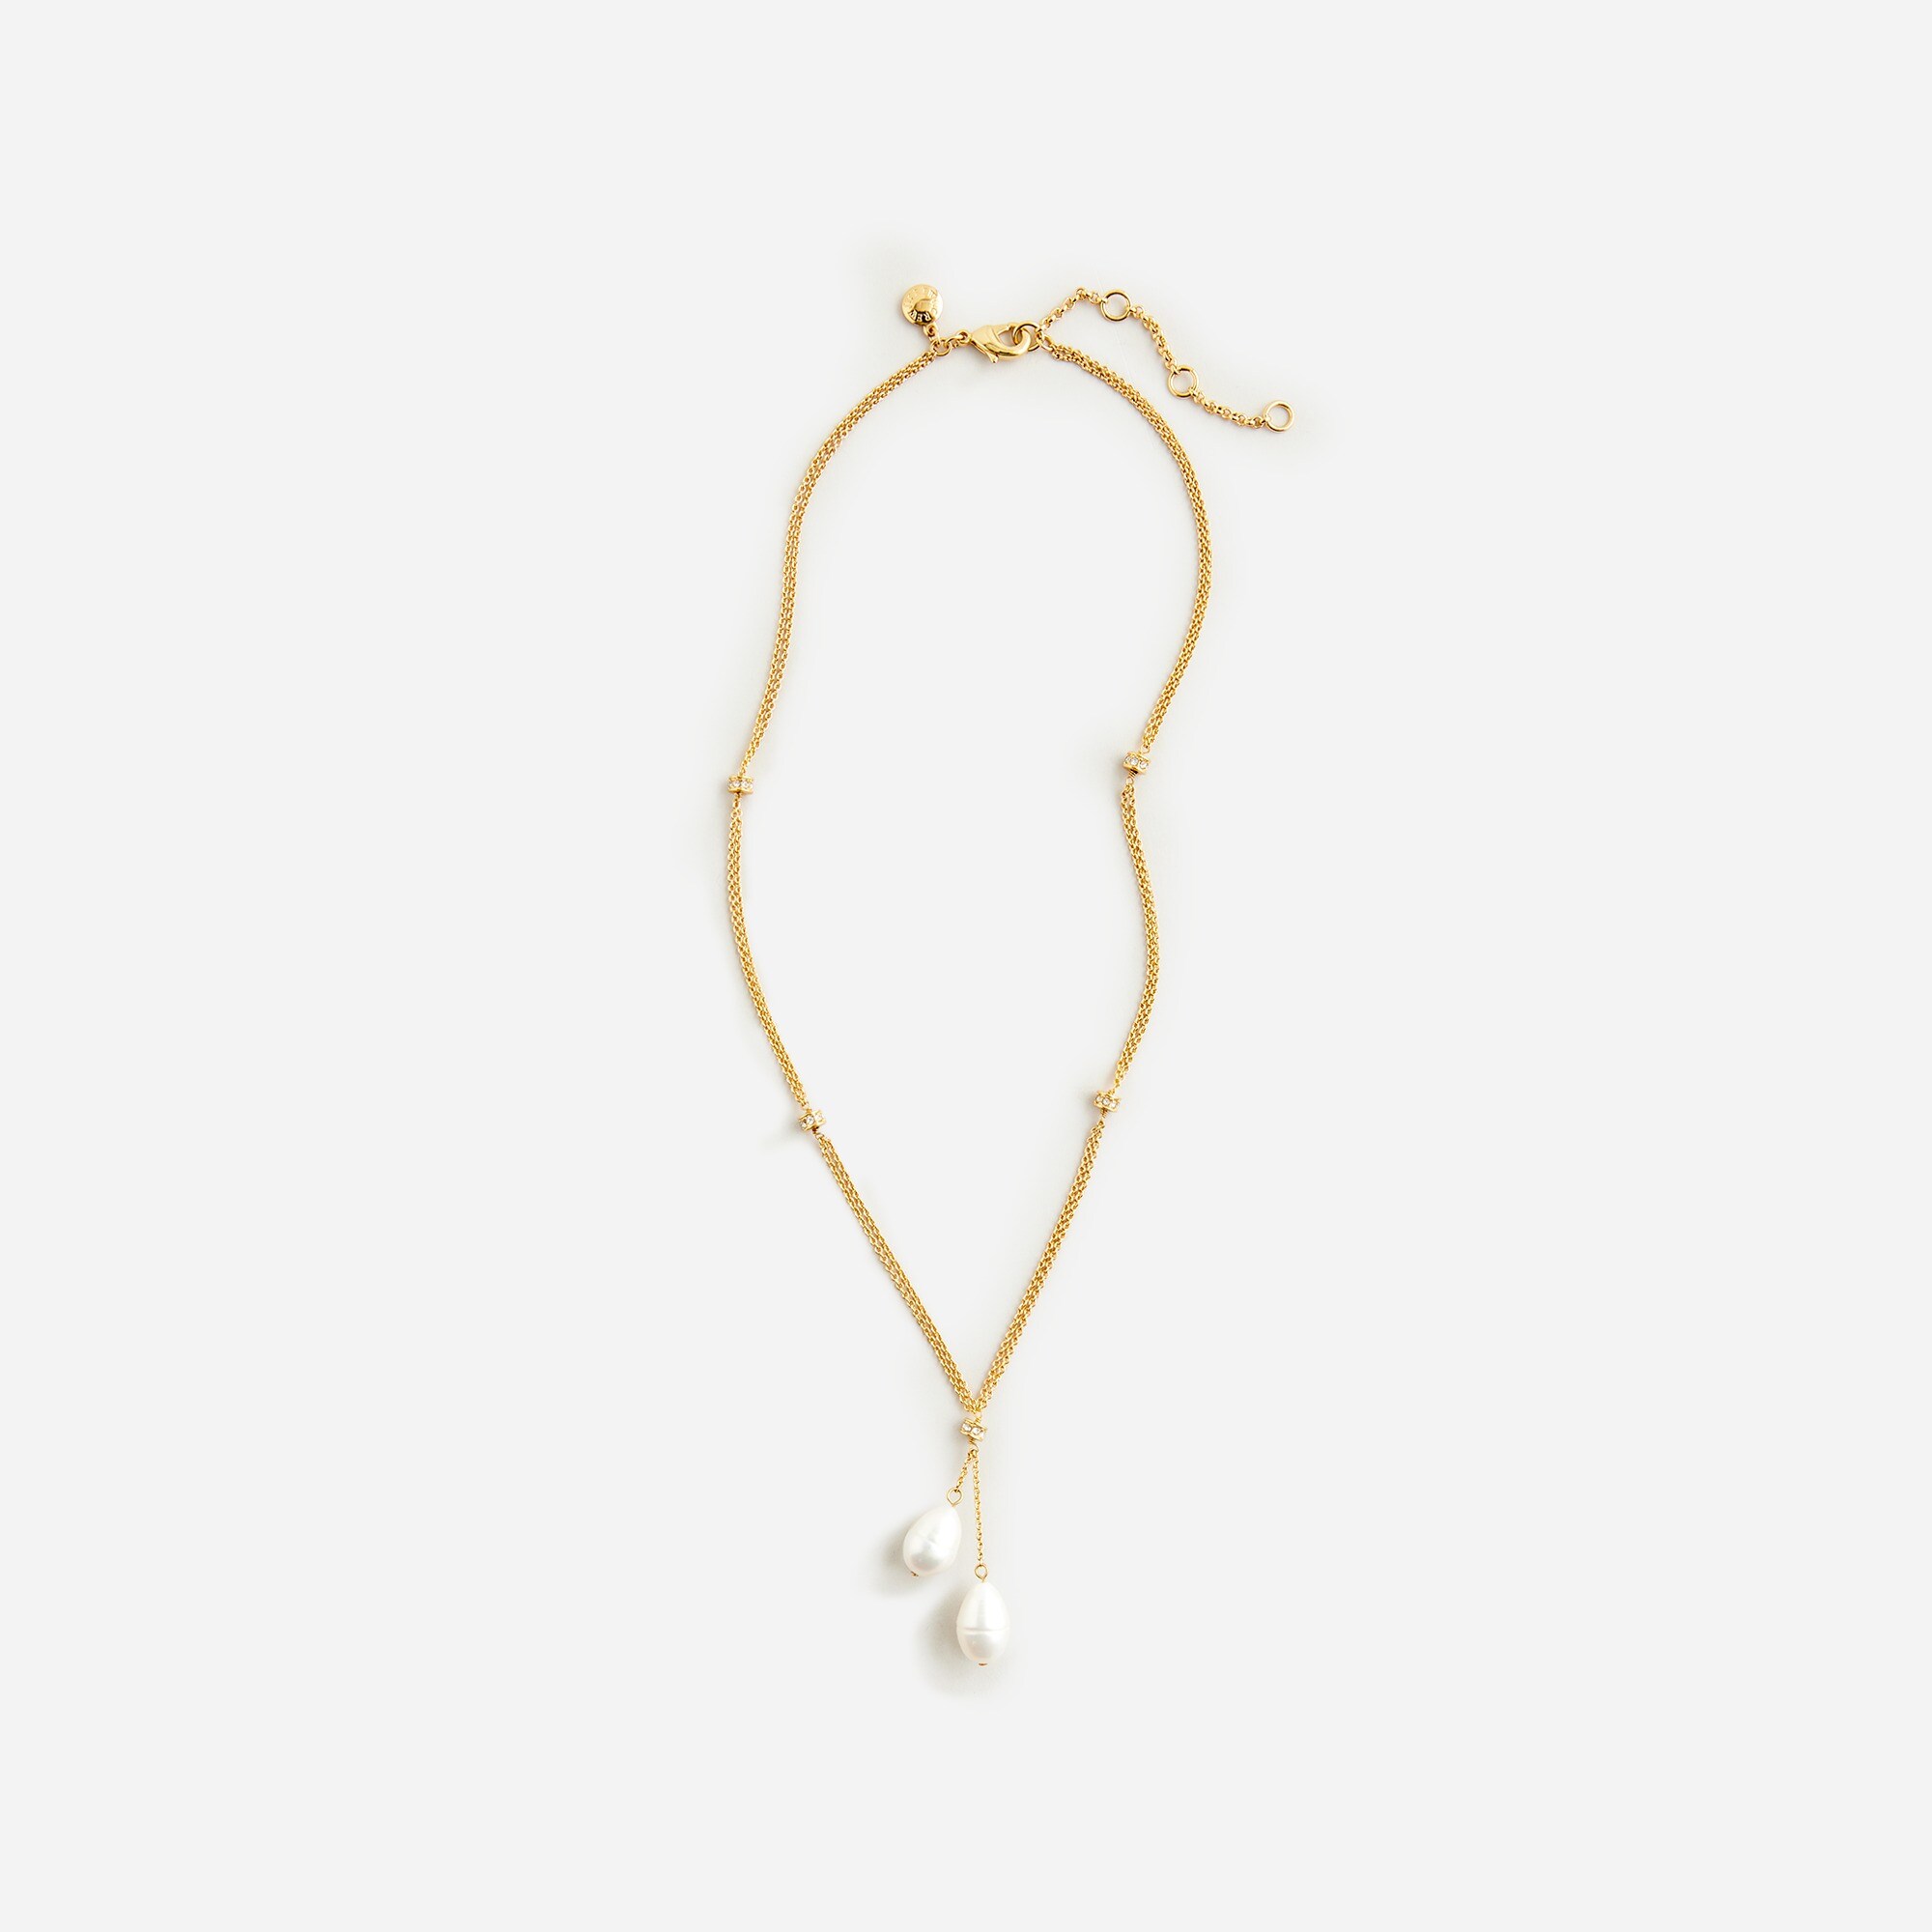  Freshwater pearl pendant necklace